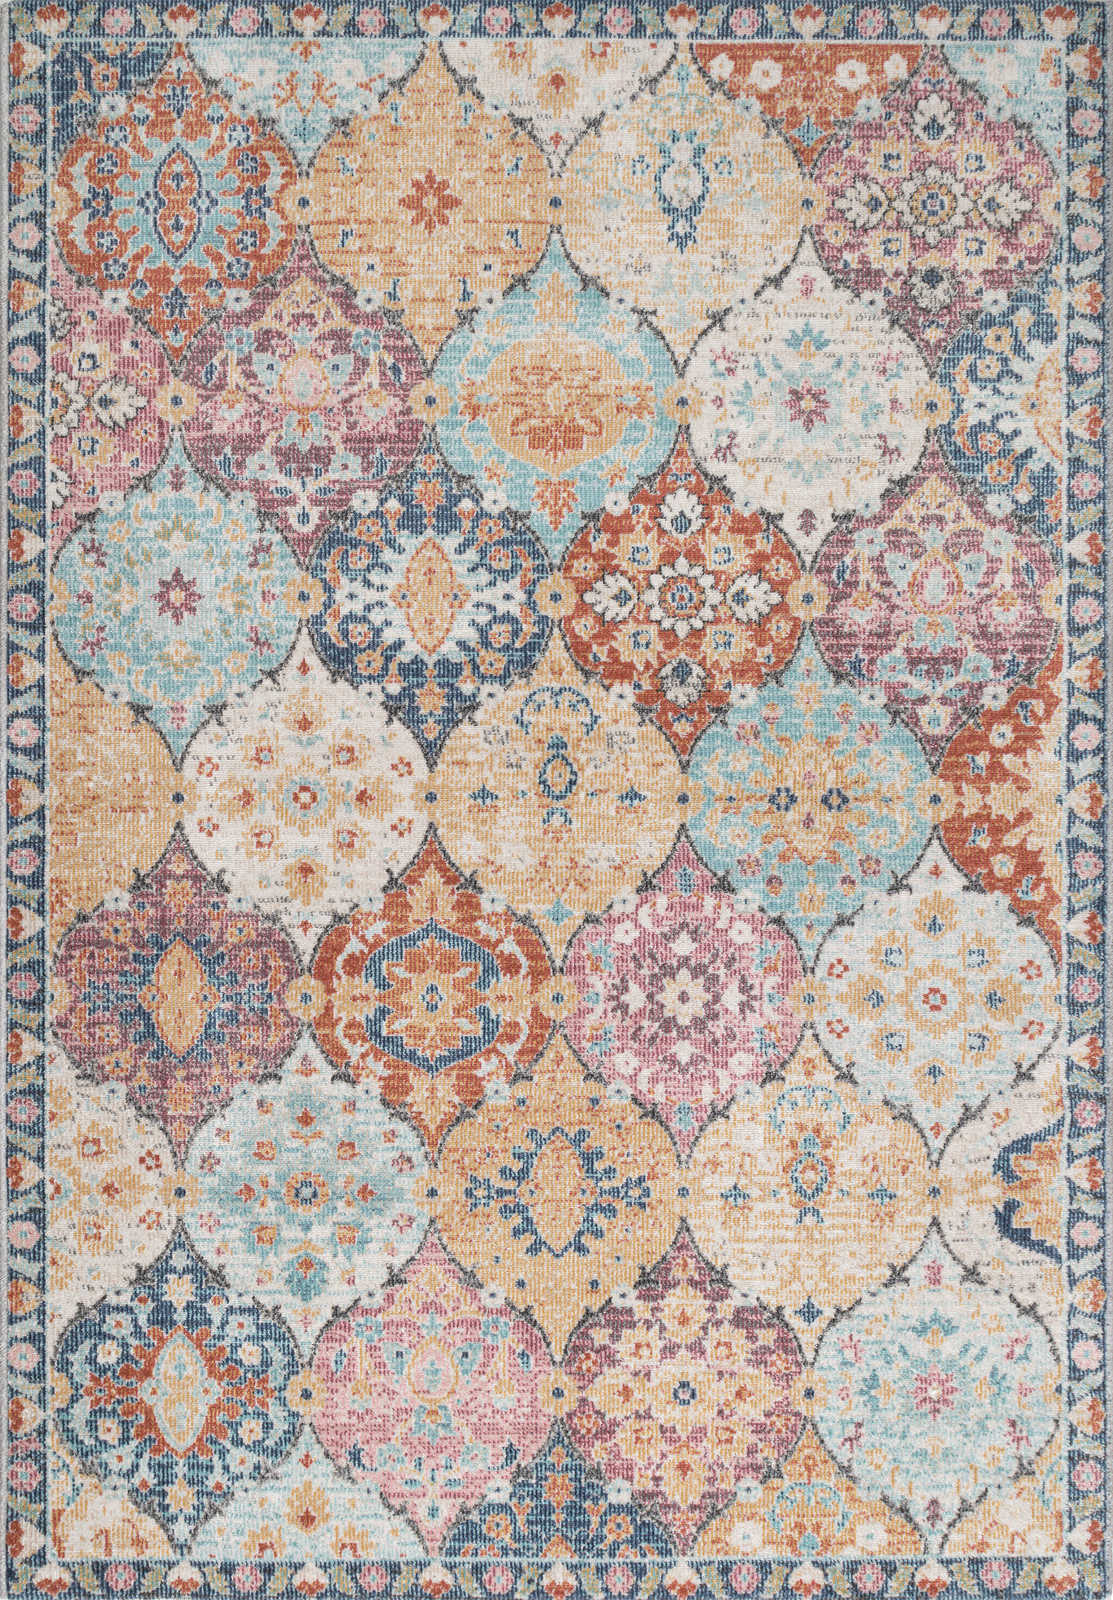             Colourful Flatweave Outdoor Rug - 230 x 160 cm
        